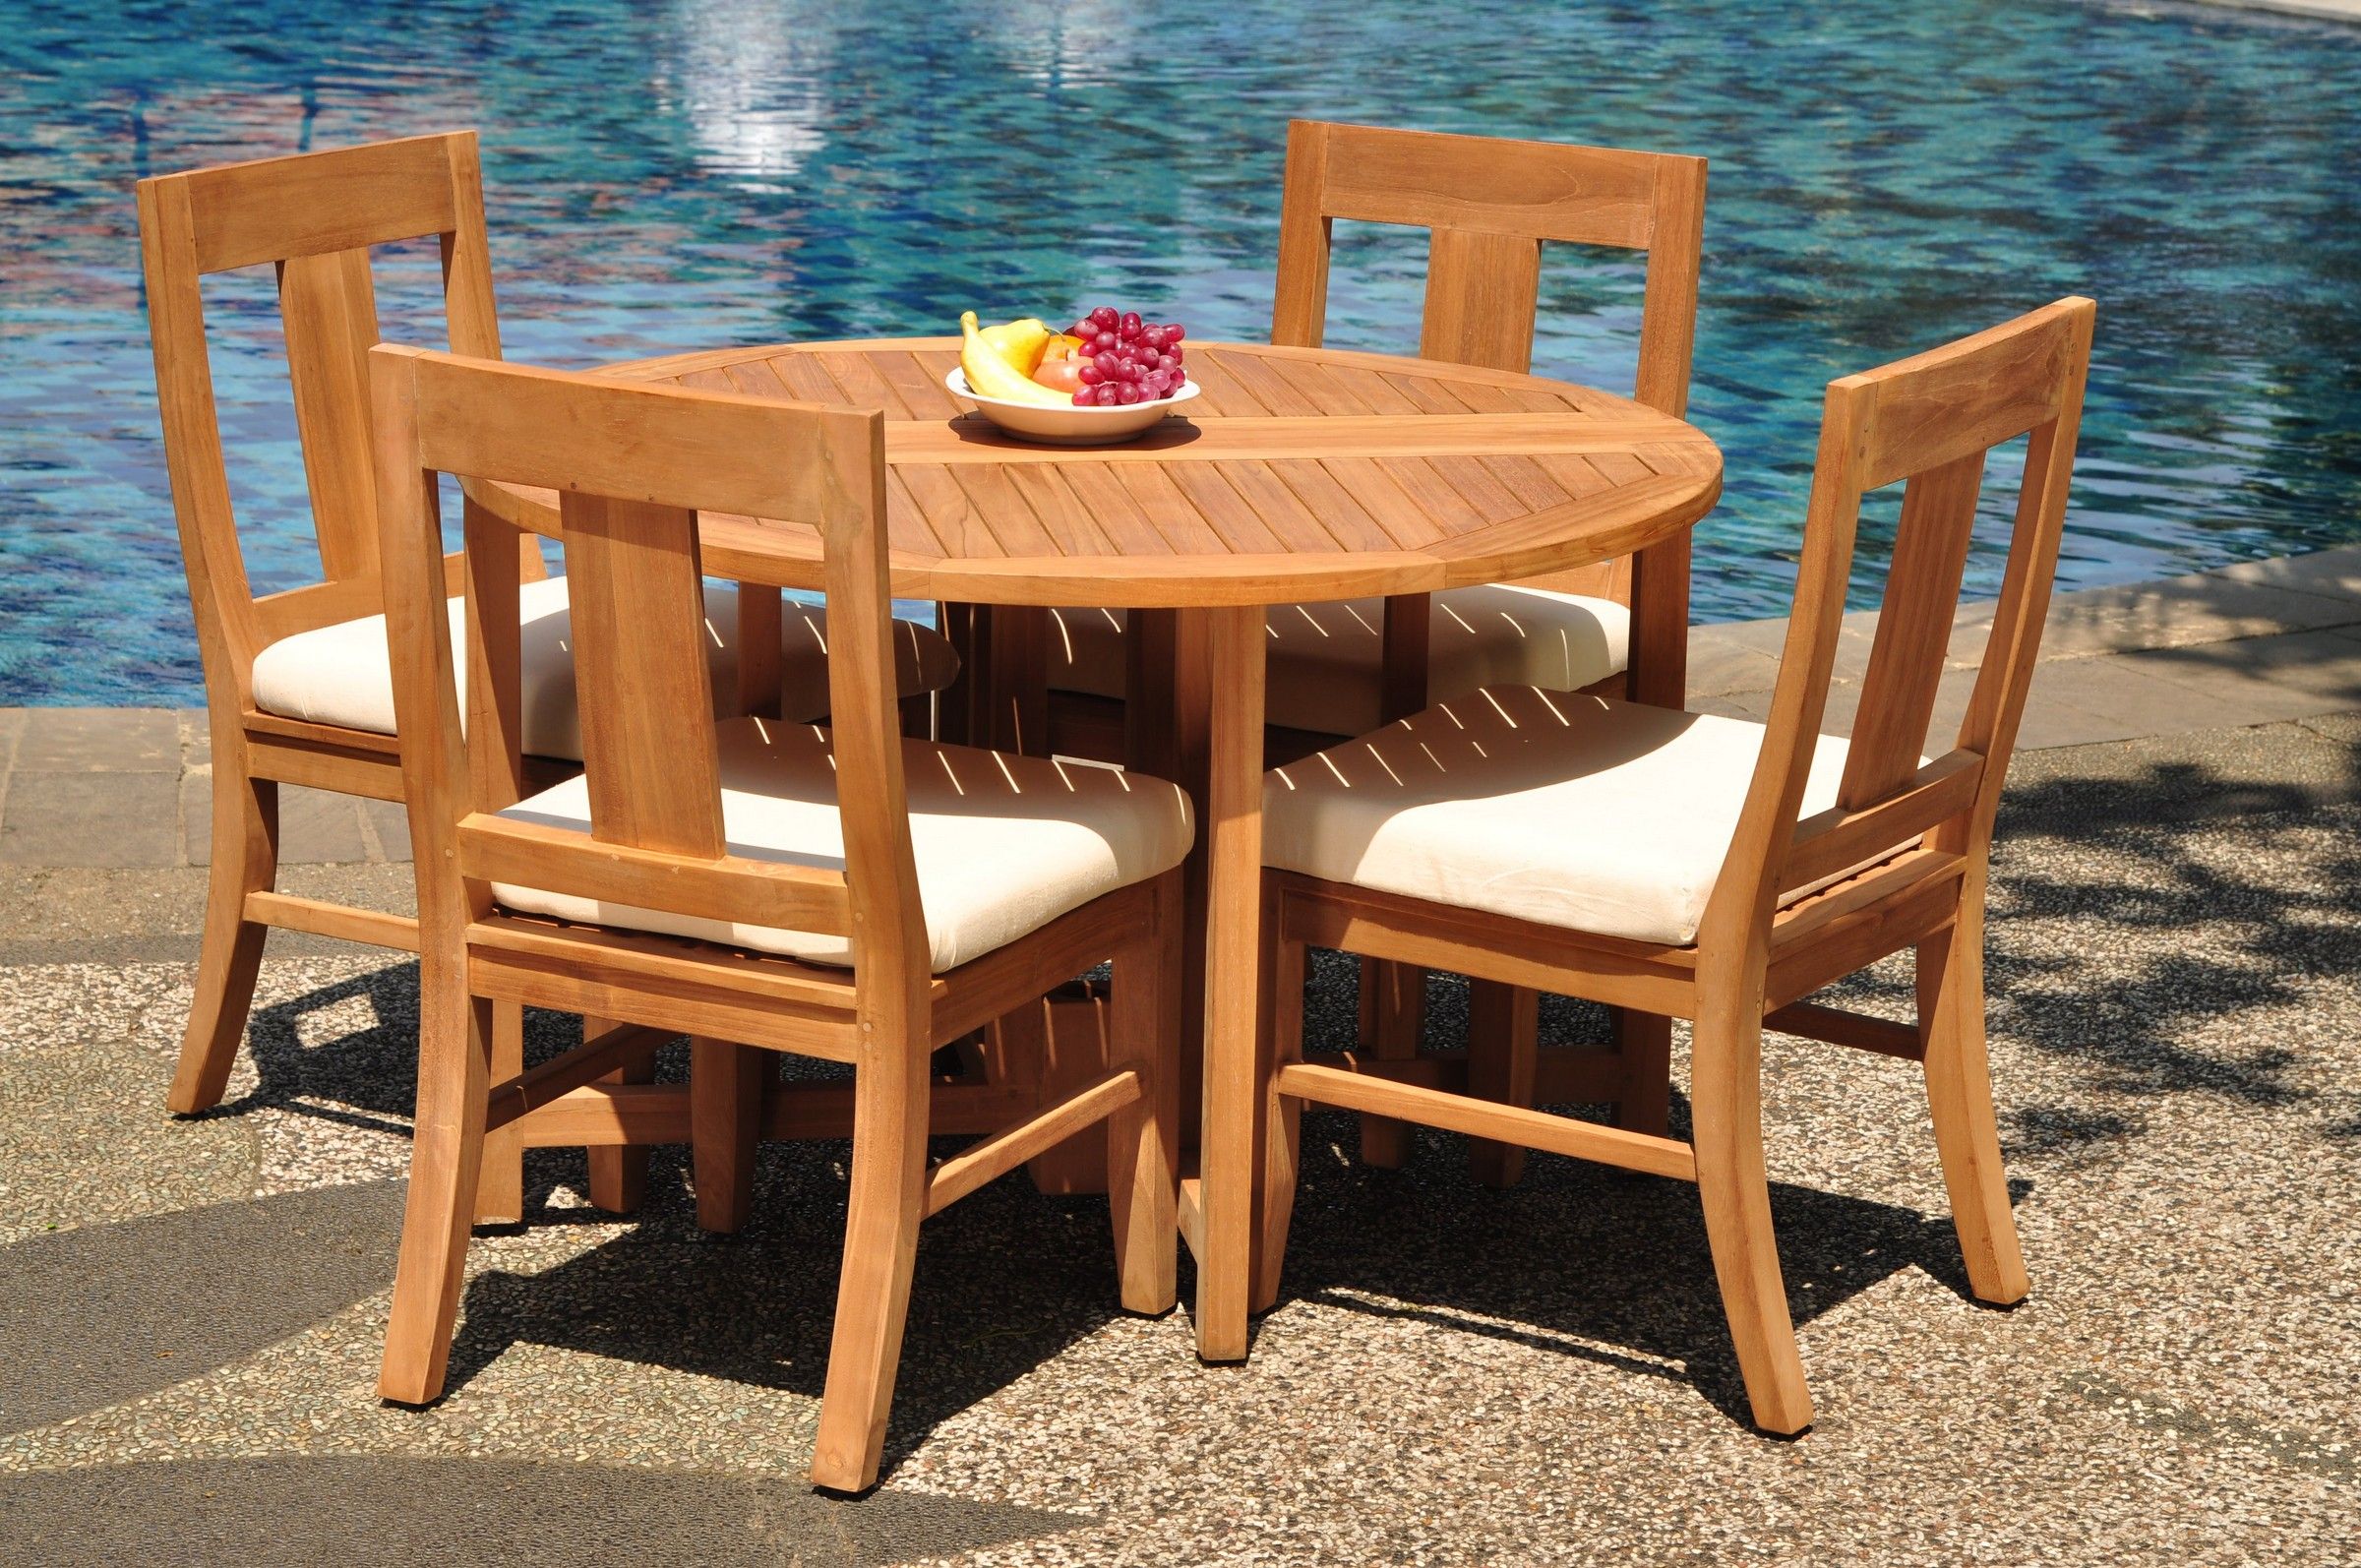 Grade A Teak Dining Set: 4 Seater 5 Pc: 48" Round Butterfly Table And 4 Pertaining To Teak Folding Chair Patio Dining Sets (View 13 of 15)